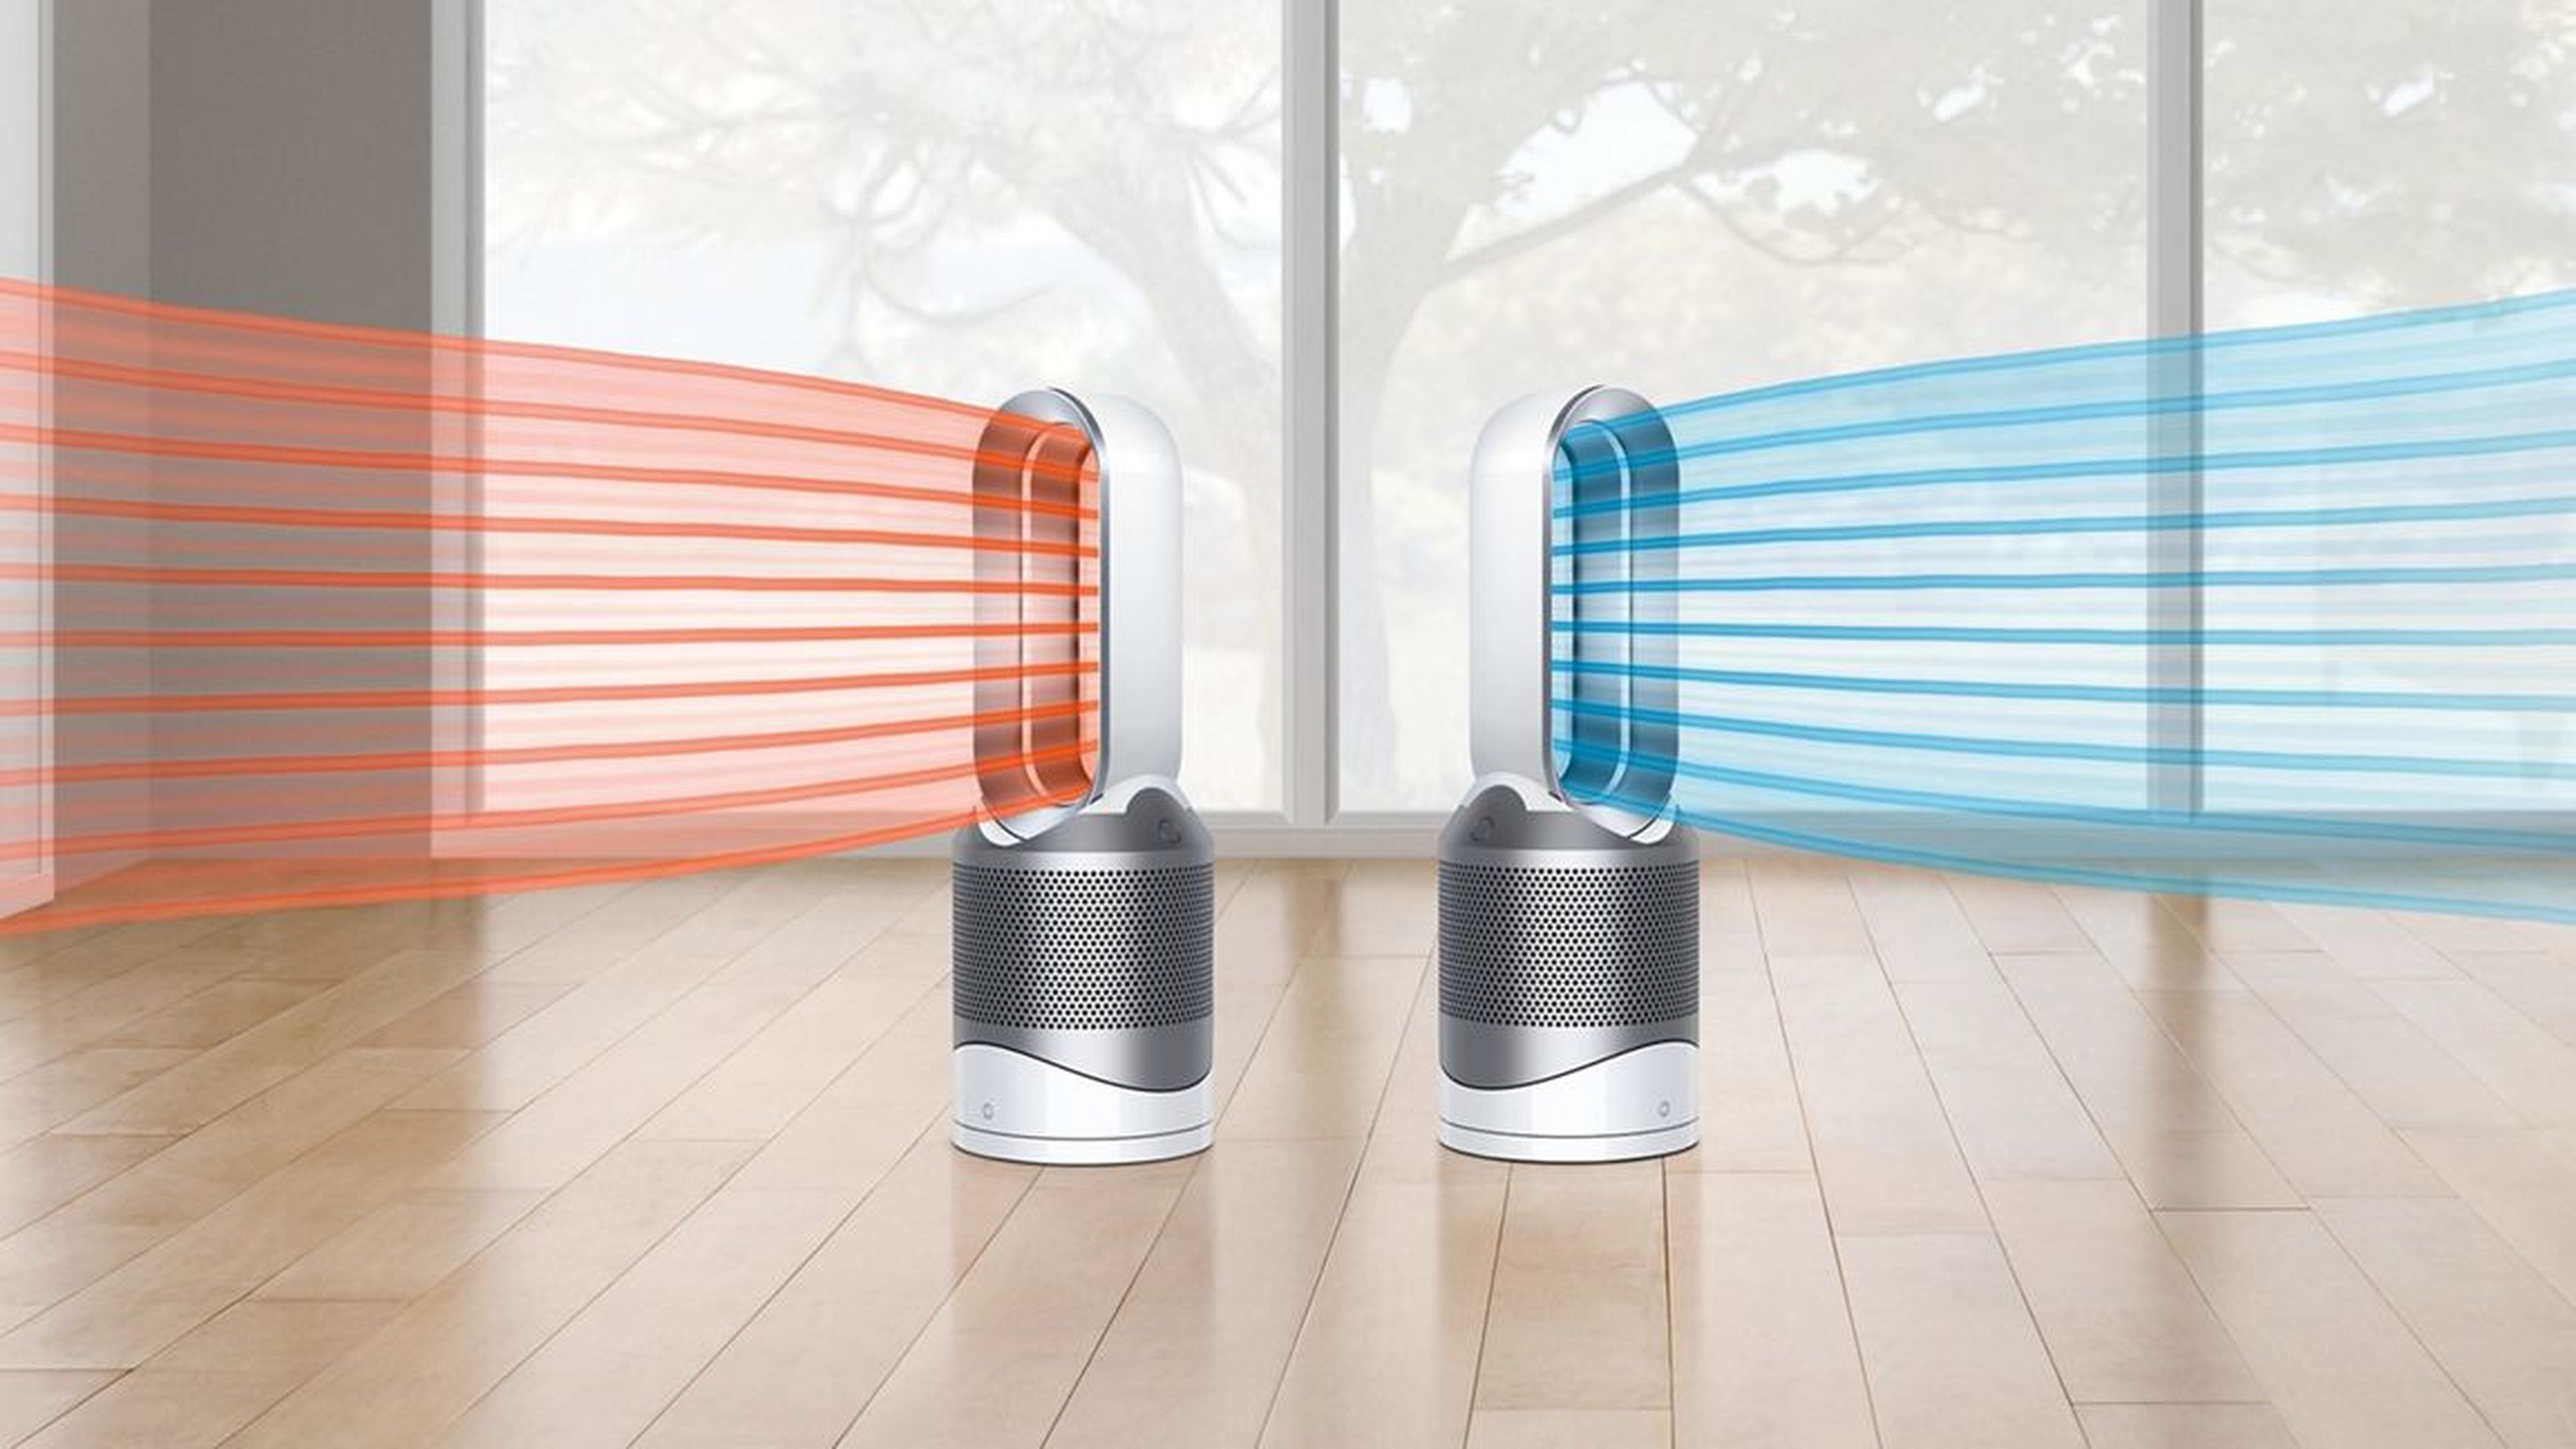 Dyson Pure Hot Cool Link